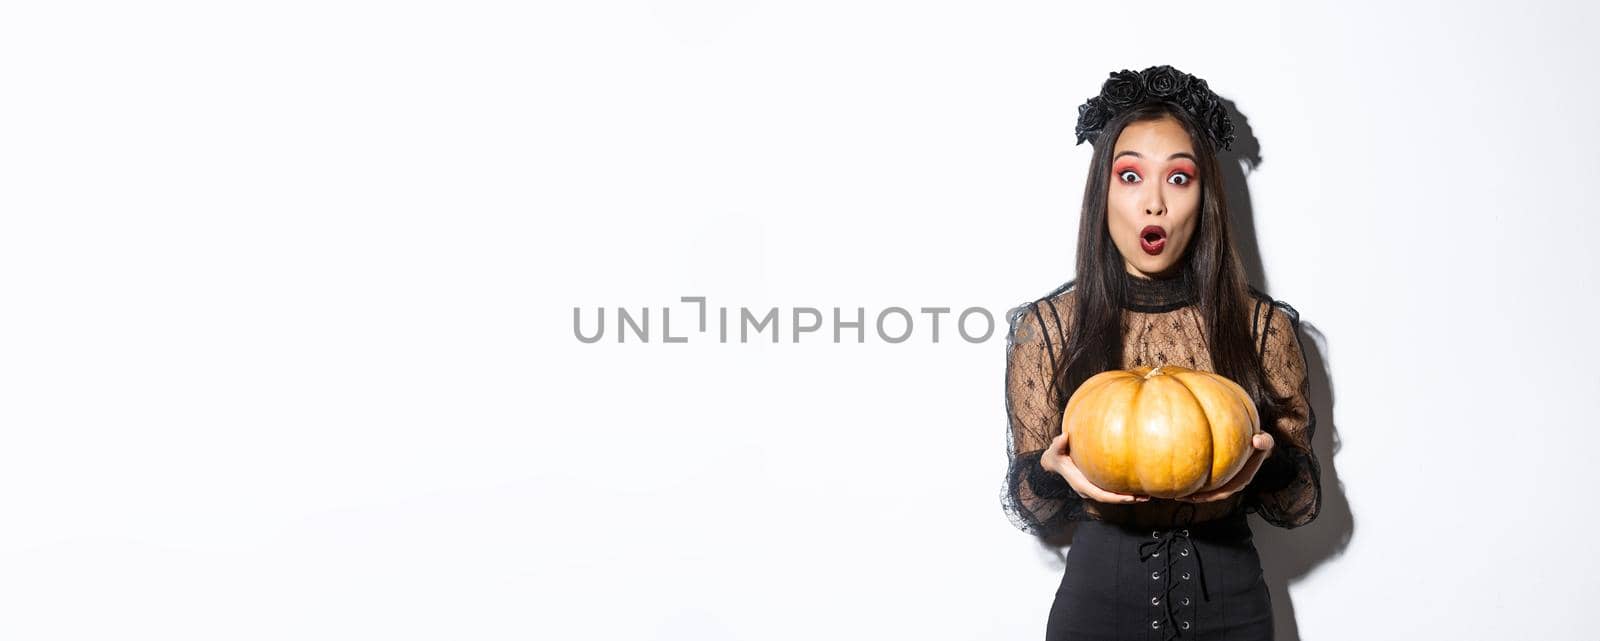 Surprised asian girl in witch costume, holding pumpkin and gasping amazed at camera, preparing for halloween holiday, standing over white background.